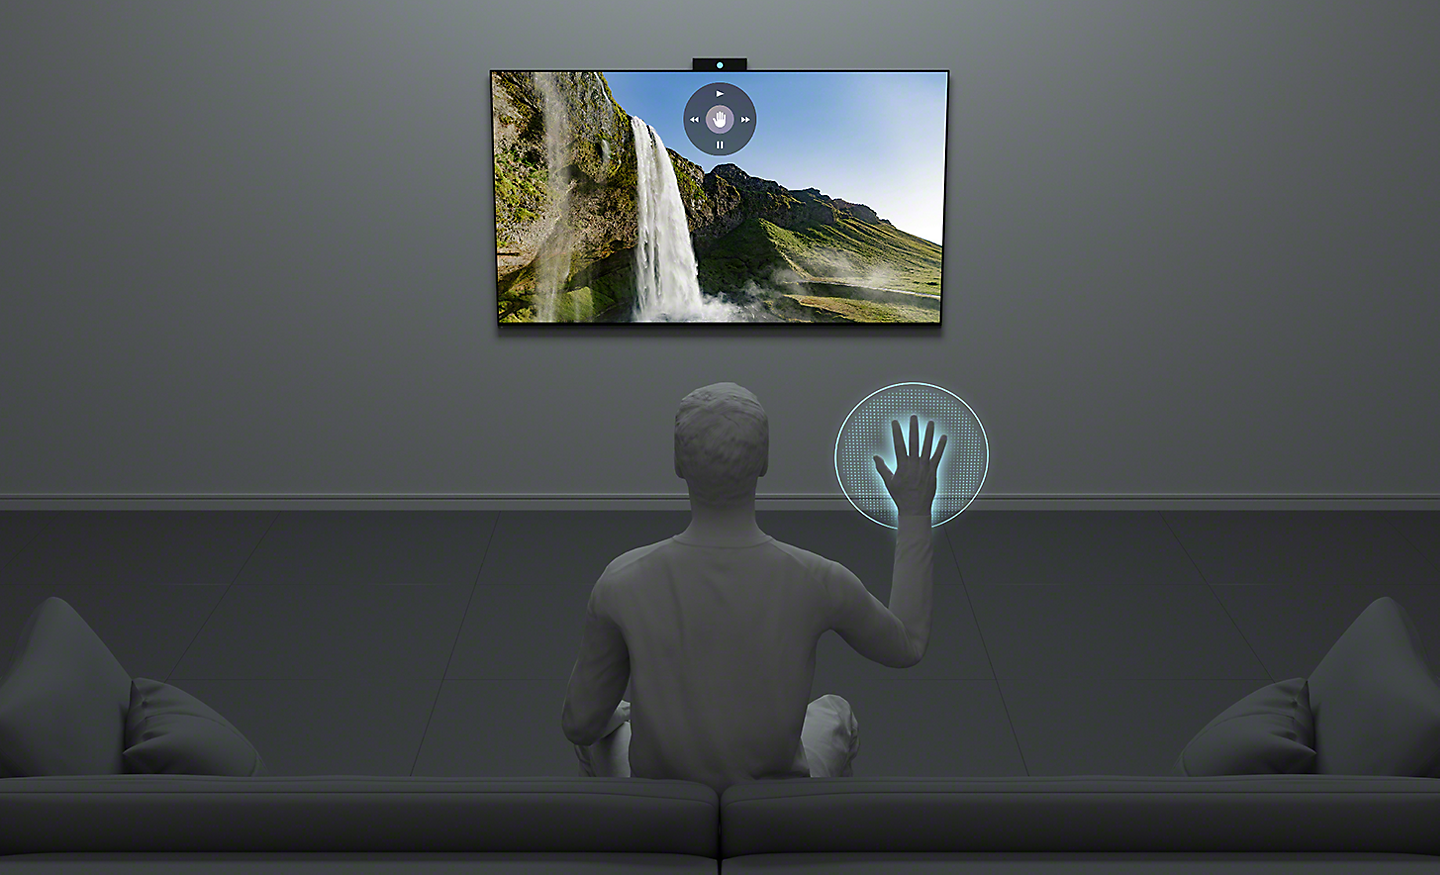 Illustration of a human using hand gestures to control his TV